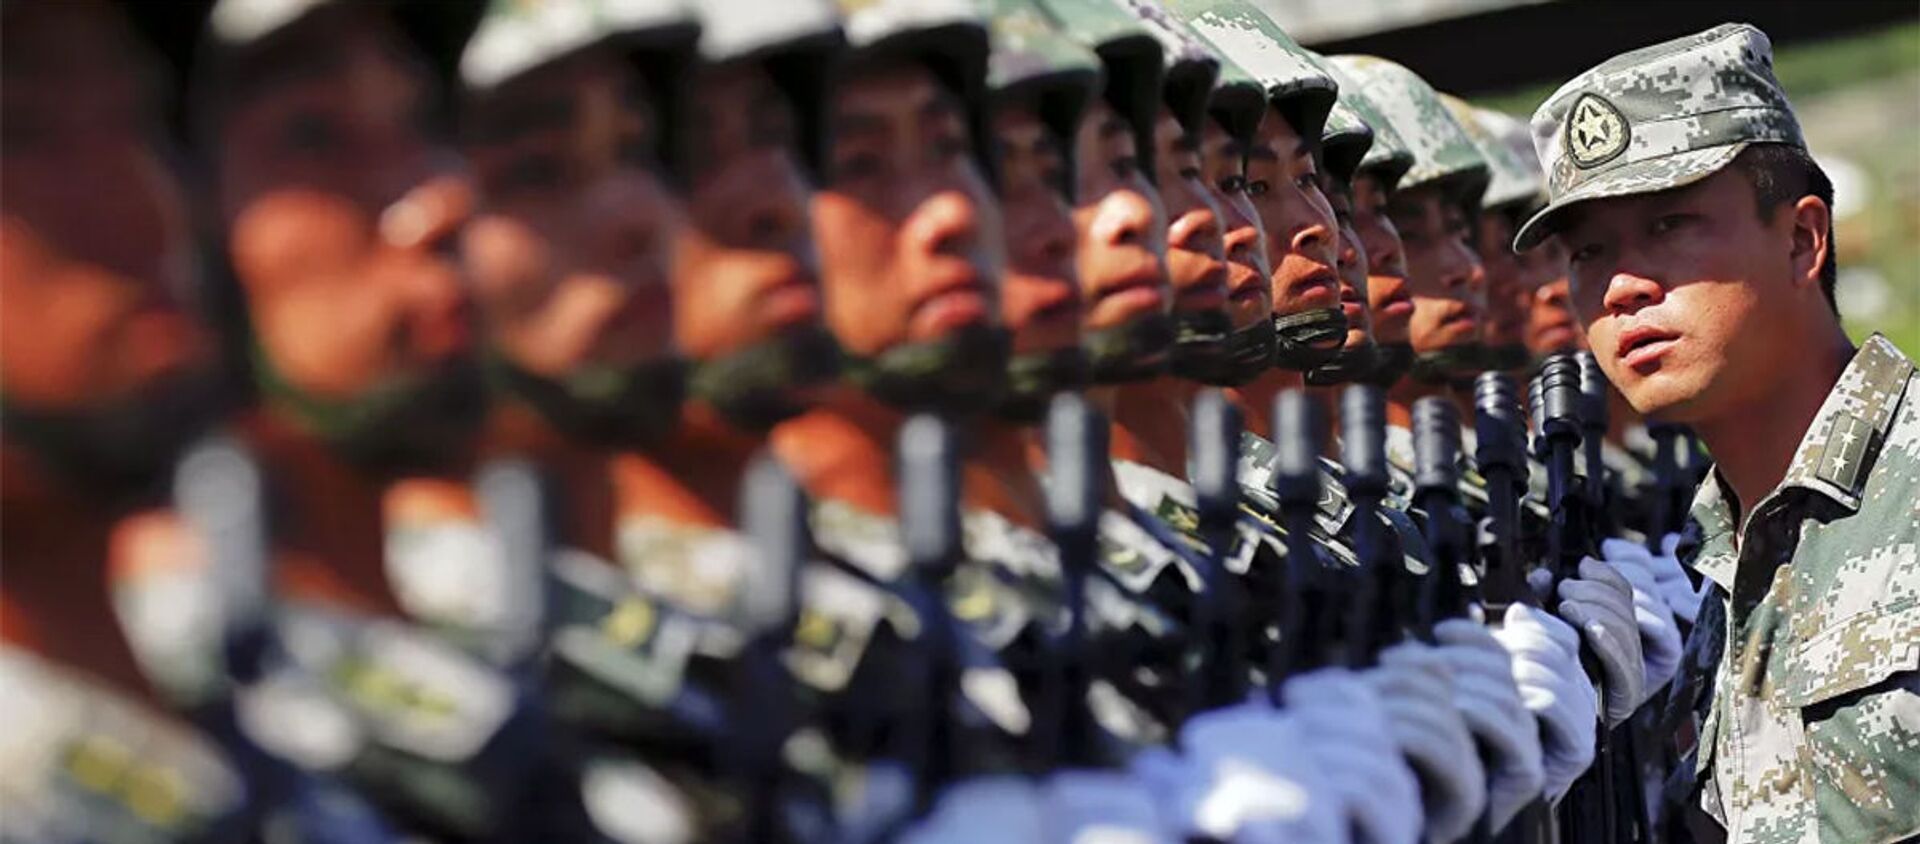 An officer gives instructions as soldiers of China's People's Liberation Army form a line during a training session for a military parade to mark the 70th anniversary of the end of World War Two, at a military base in Beijing, China, August 22, 2015 - 俄羅斯衛星通訊社, 1920, 07.06.2021